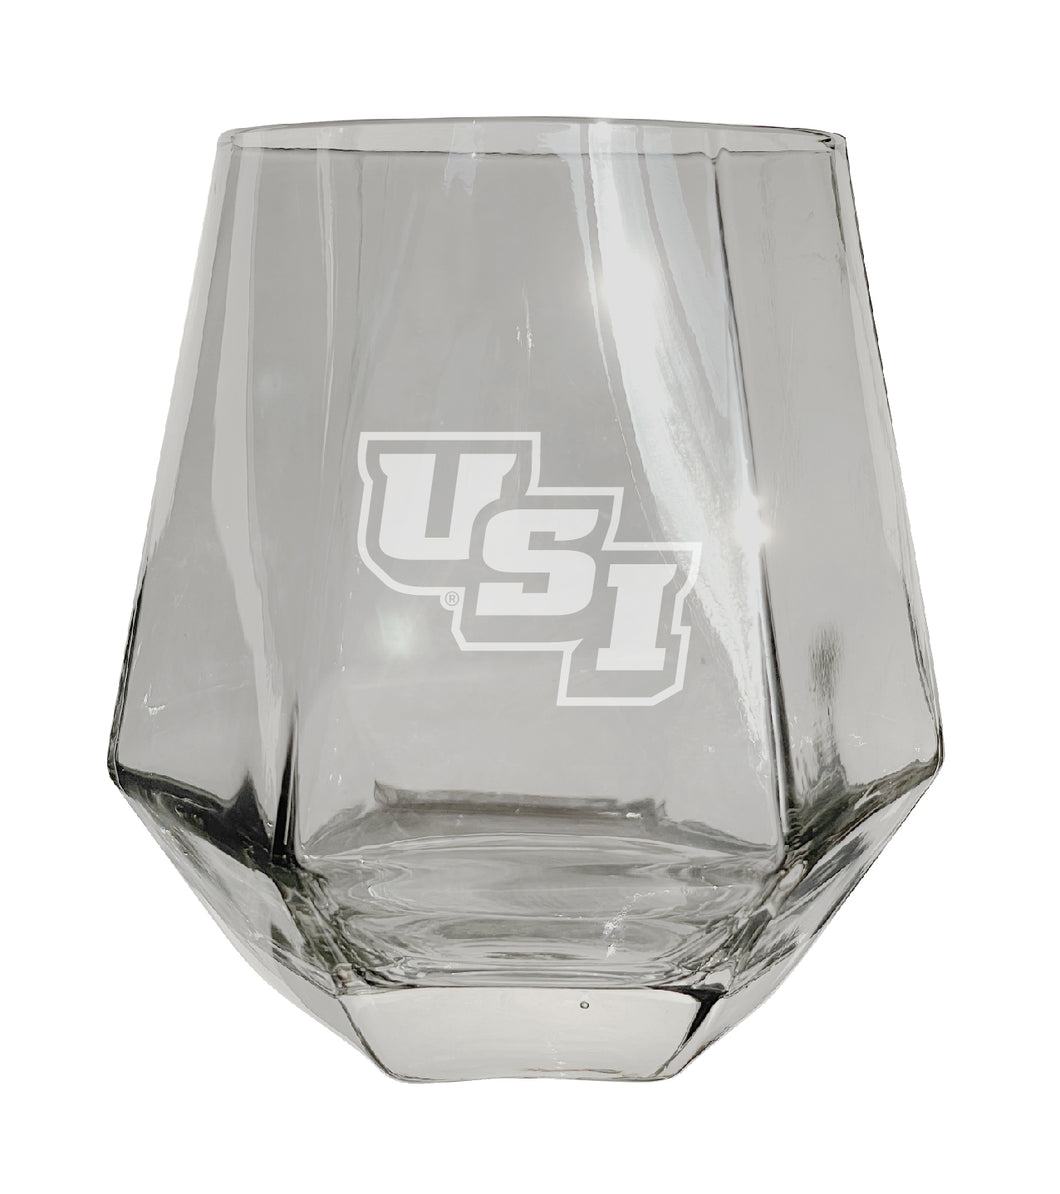 University of Southern Indiana Tigers Etched Diamond Cut 10 oz Stemless Wine Glass - NCAA Licensed